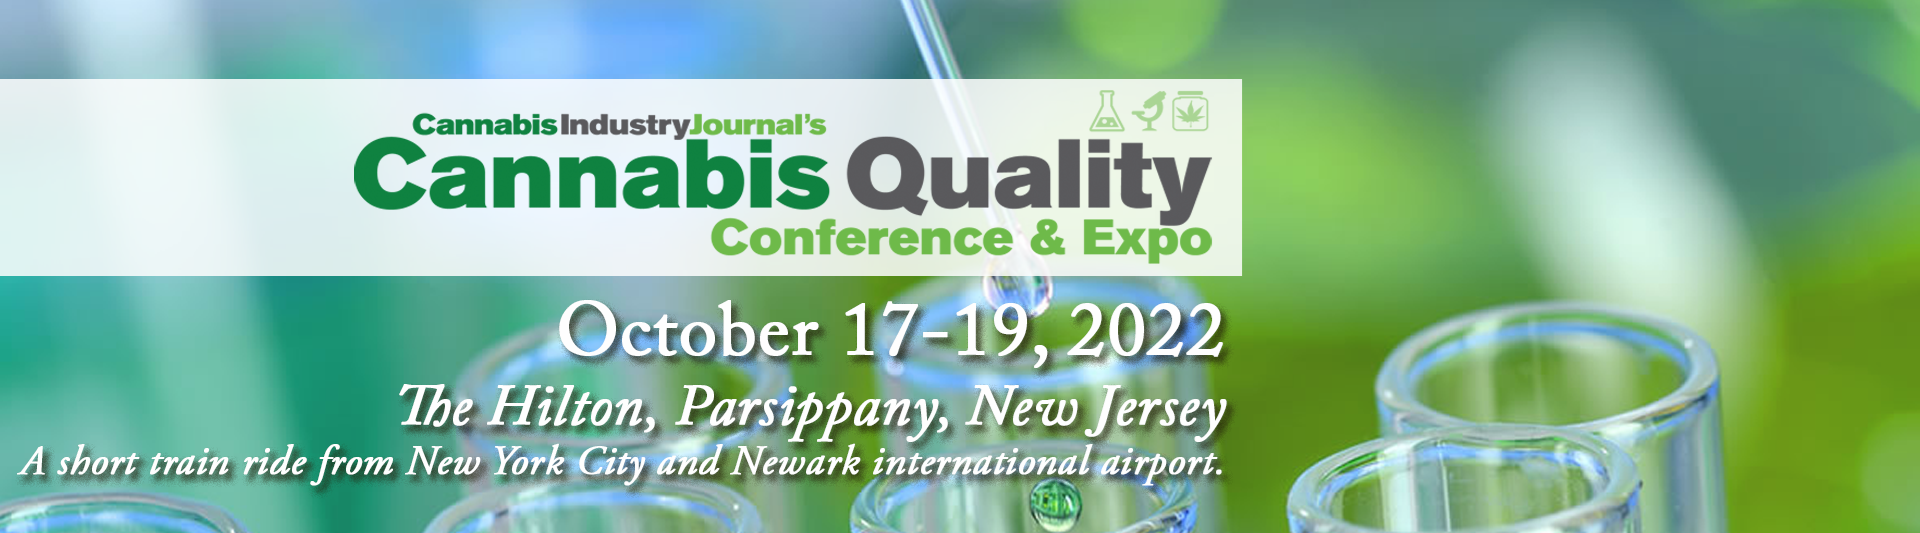 Cannabis Quality Conference 2022